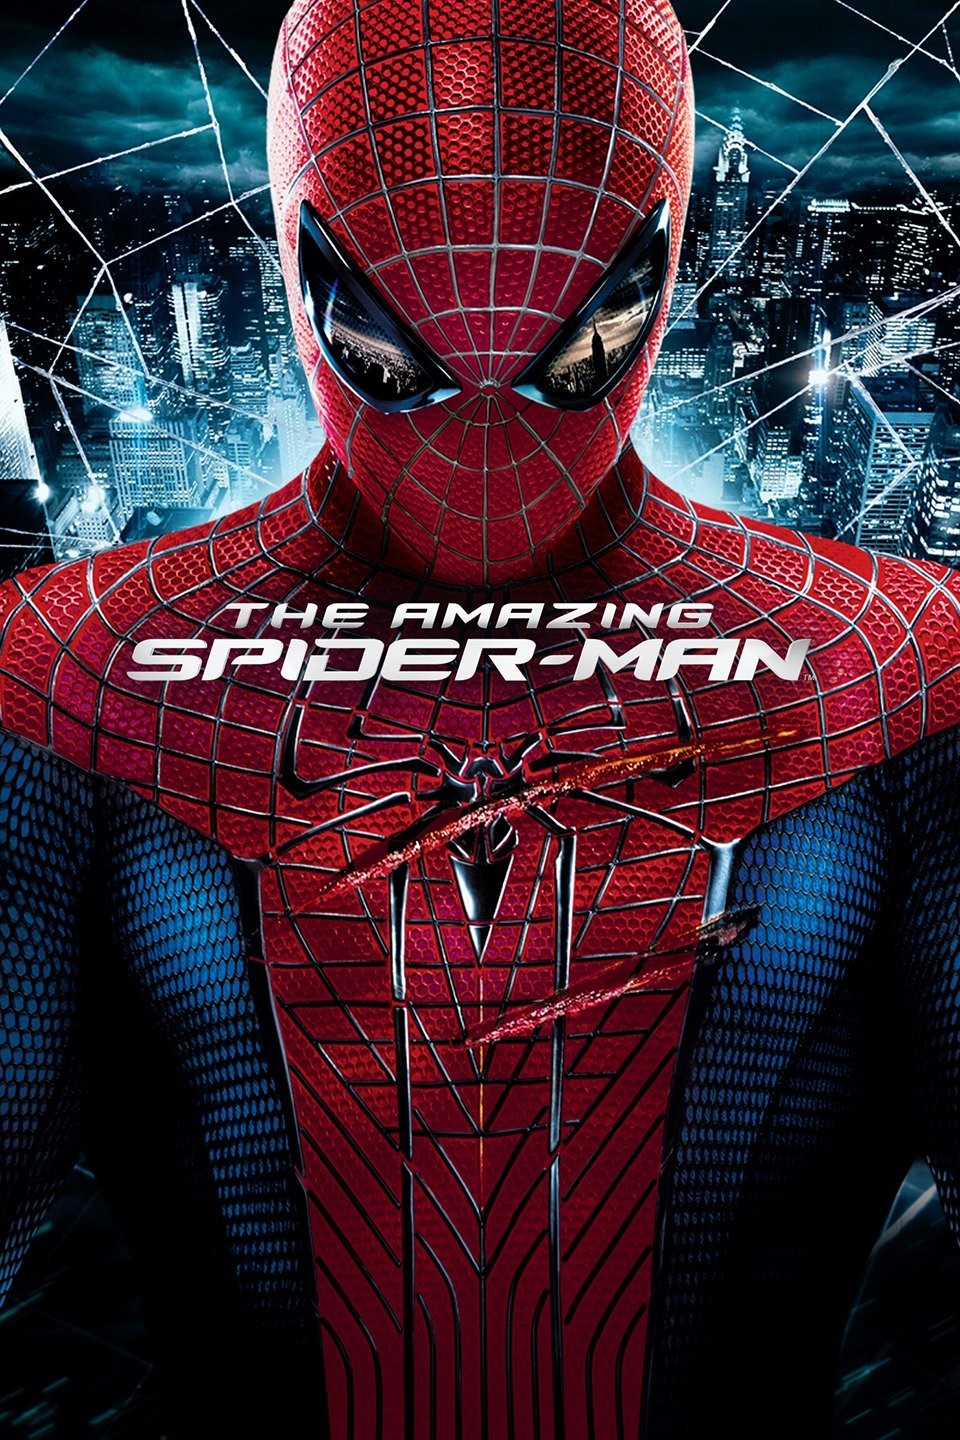 All Spider-Man movies scores on rotten tomatoes.Do you think these